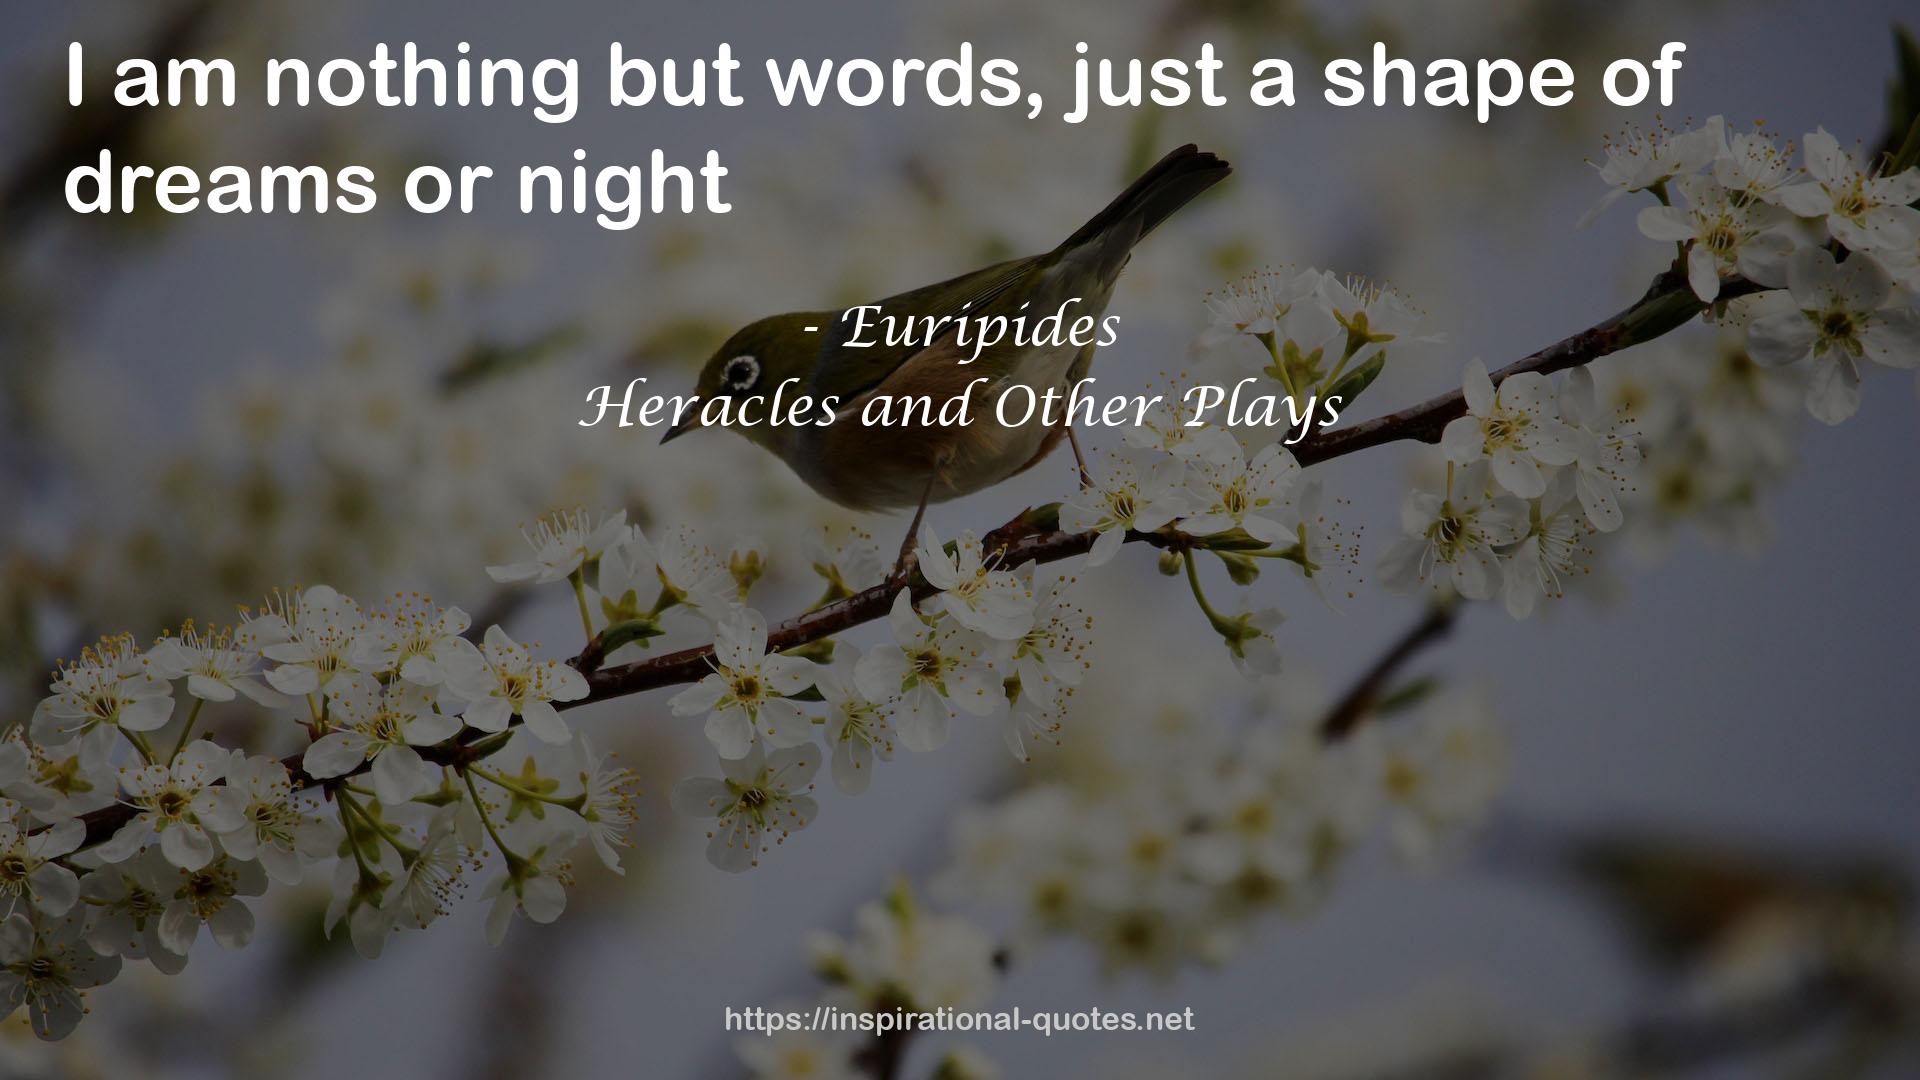 Heracles and Other Plays QUOTES